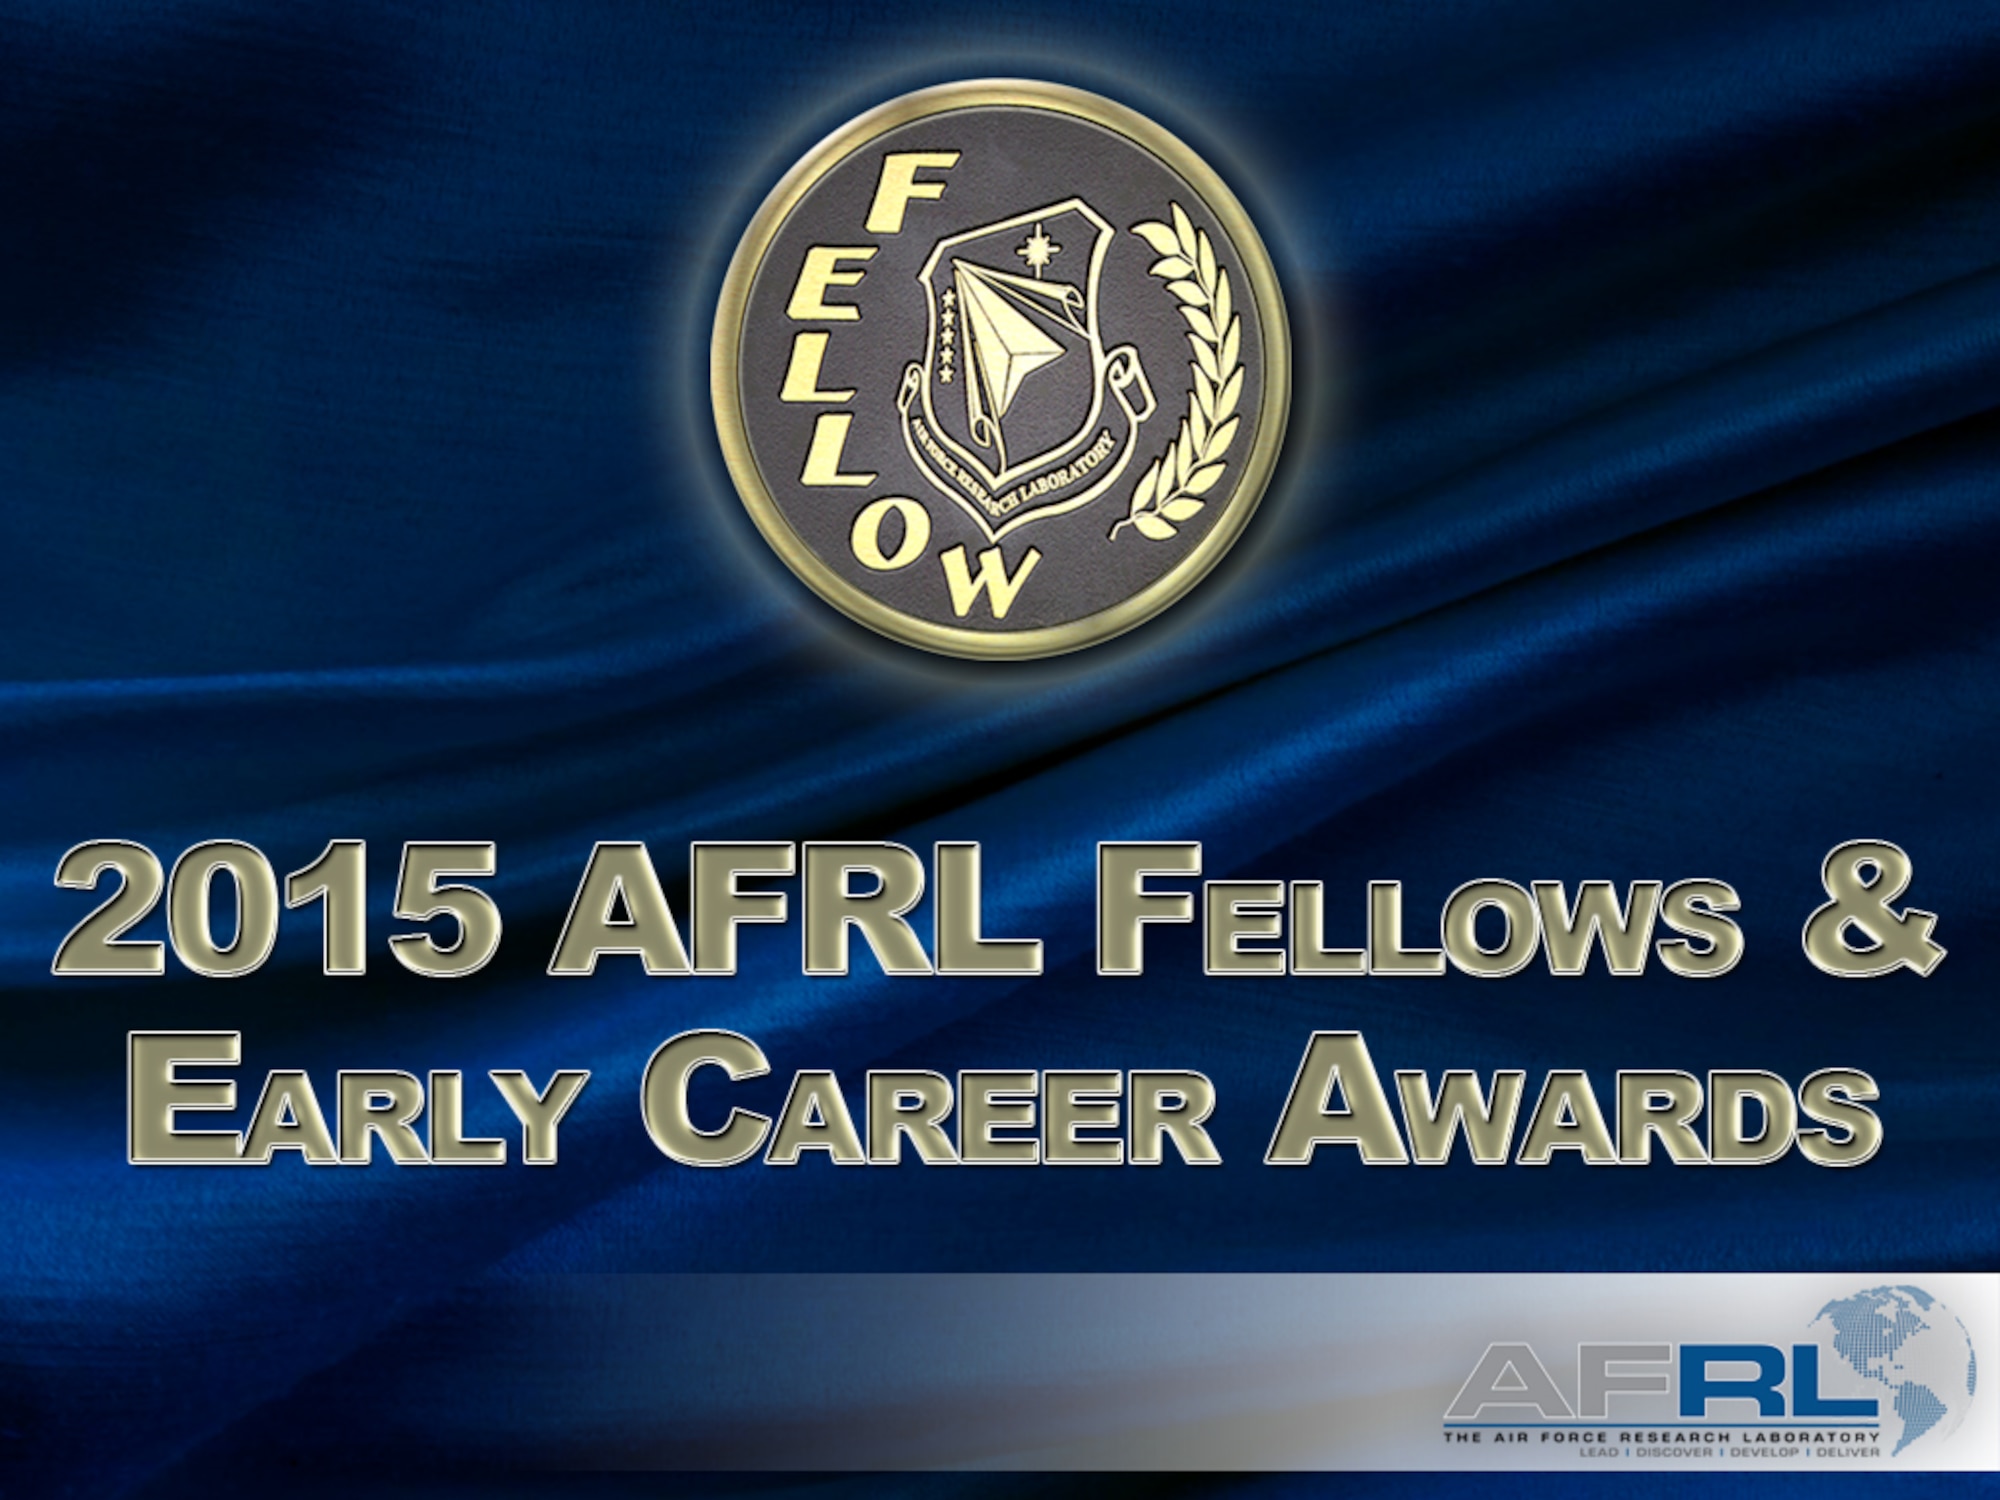 The Air Force Research Laboratory will honor some of its best and brightest scientists and engineers at the 2015 Air Force Research Laboratory Fellows and Early Career Awards banquet October 22. (U.S. Air Force image by Keith Lewis)